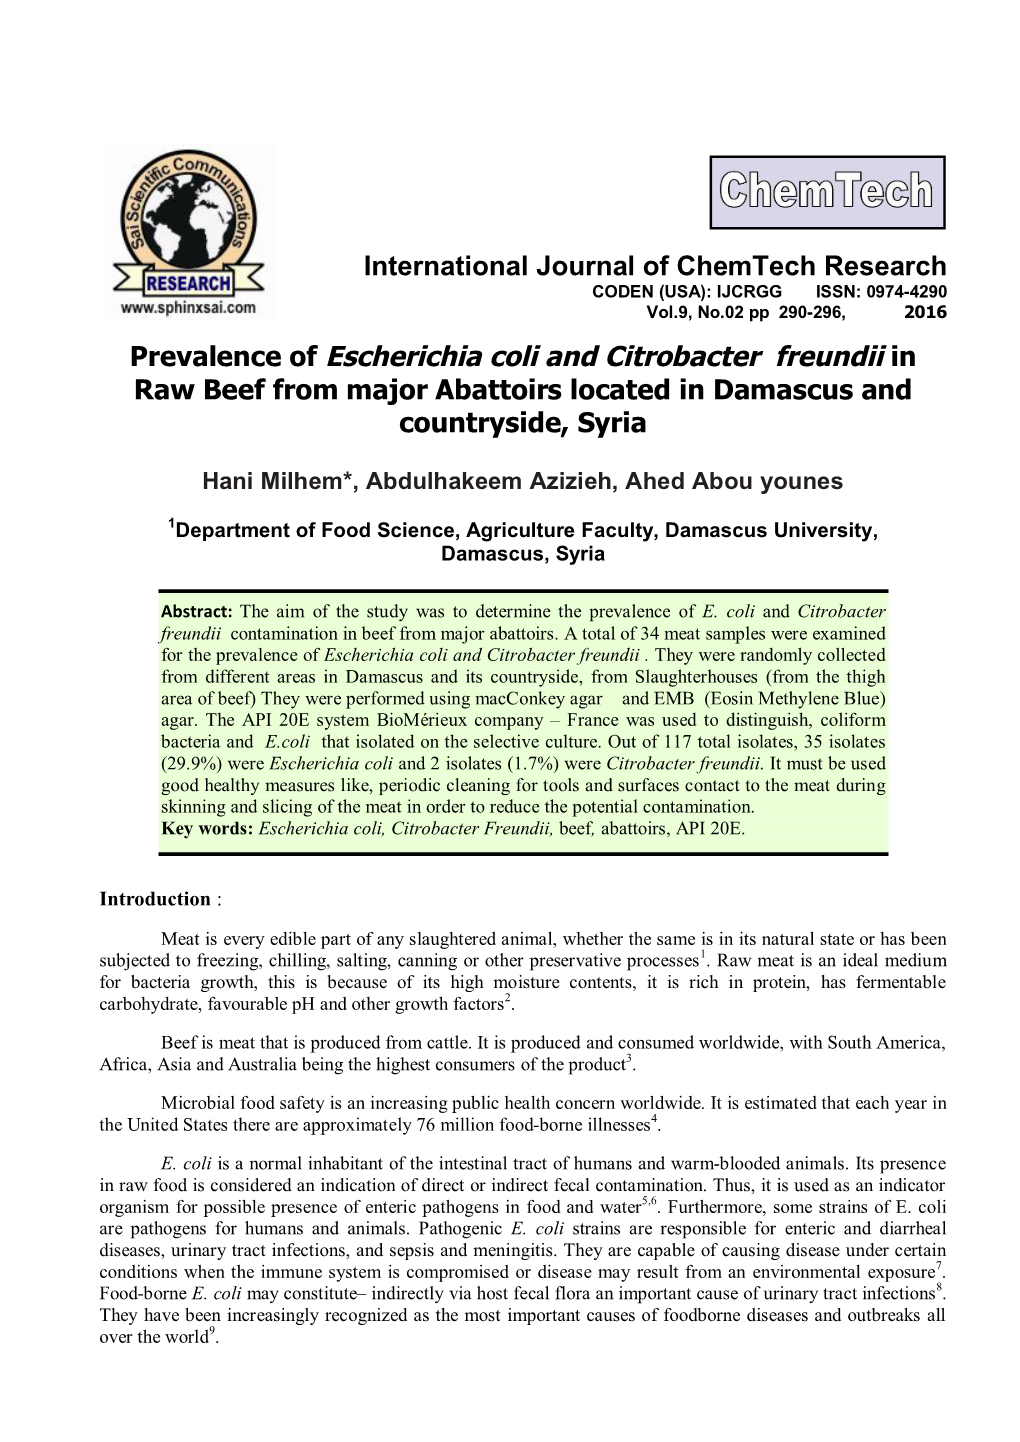 Prevalence of Escherichia Coli and Citrobacter Freundii in Raw Beef from Major Abattoirs Located in Damascus and Countryside, Syria